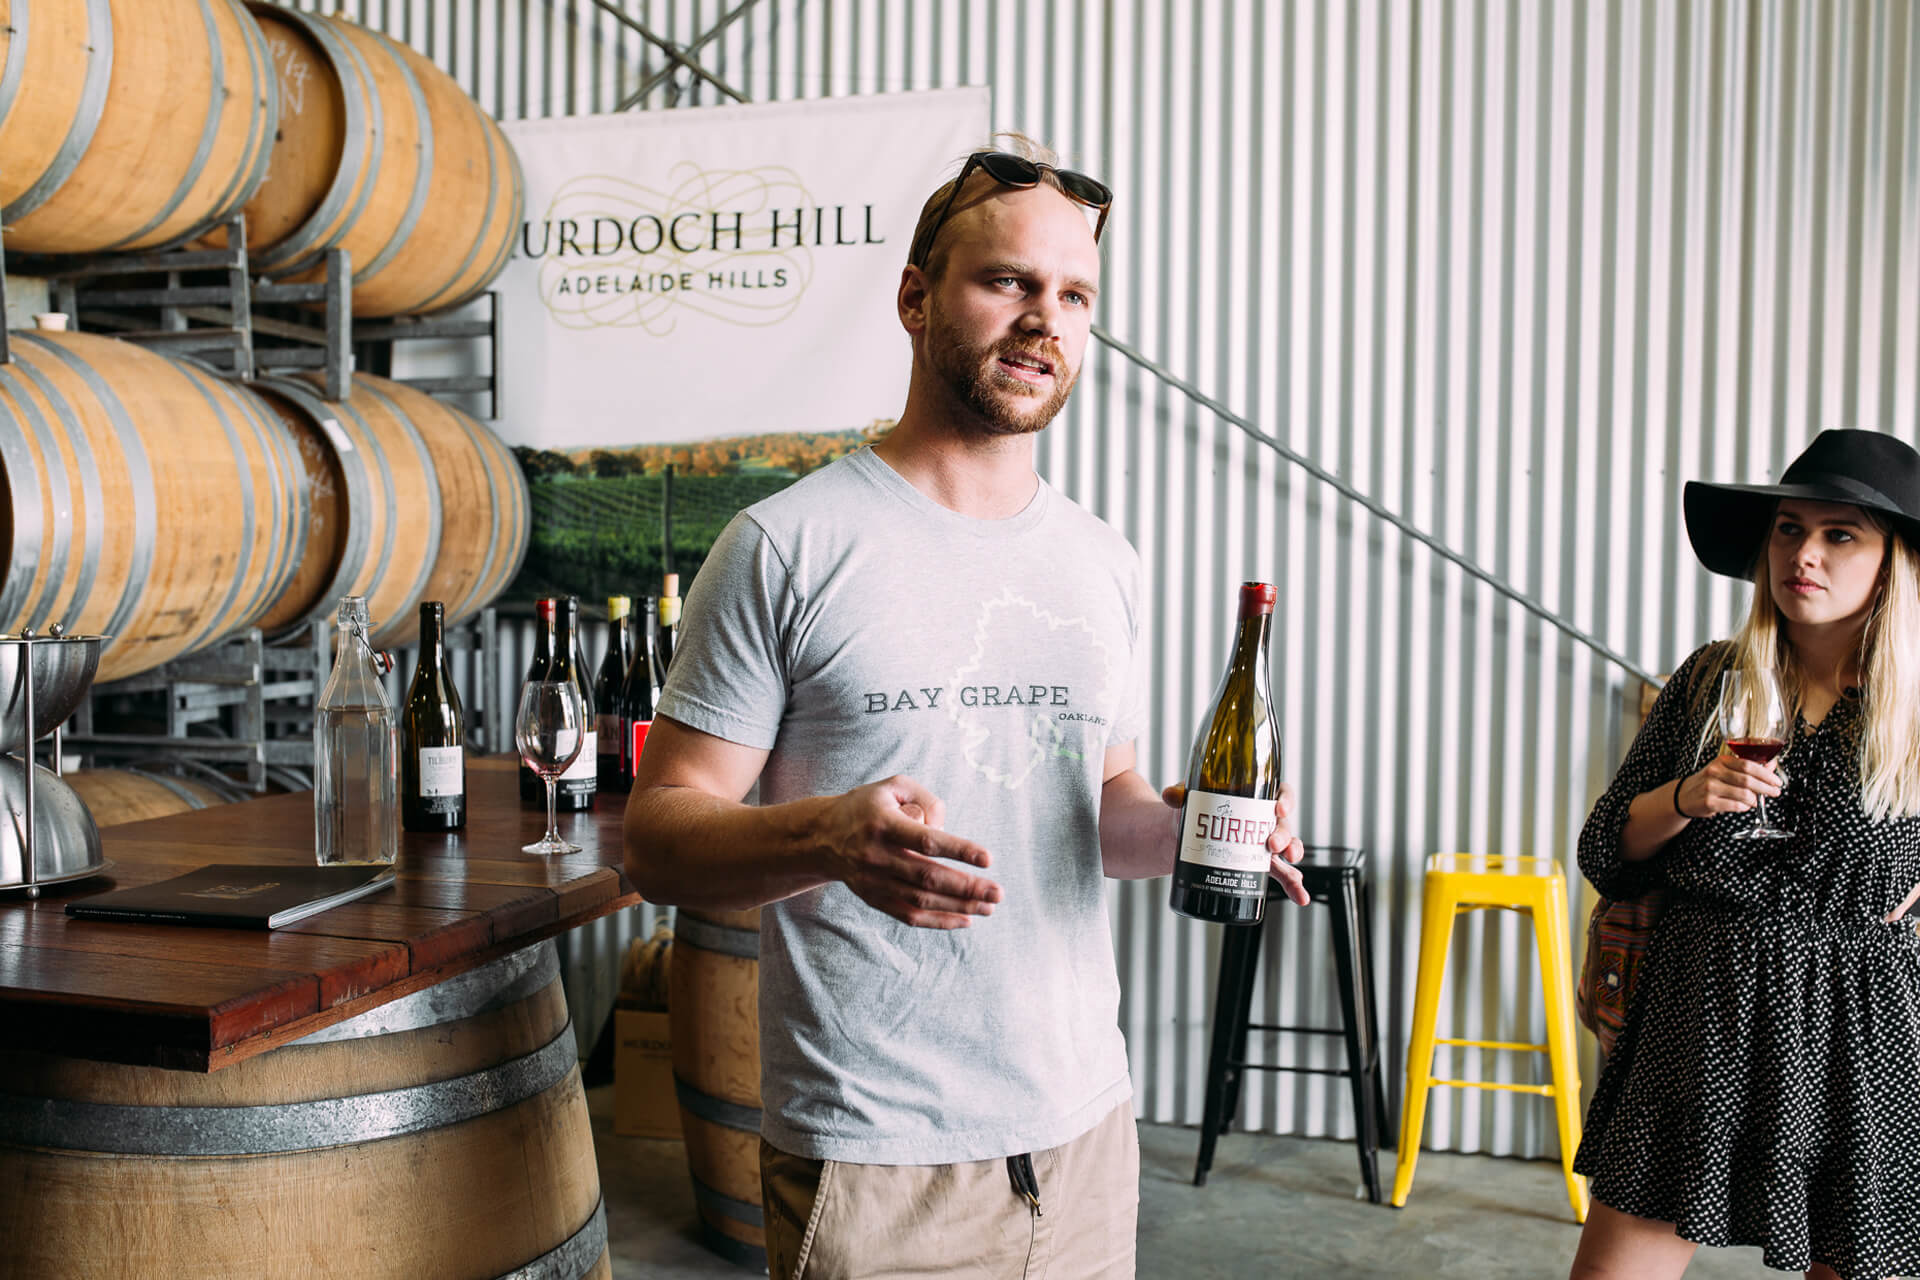 Michael Downer from Murdoch Hill winery